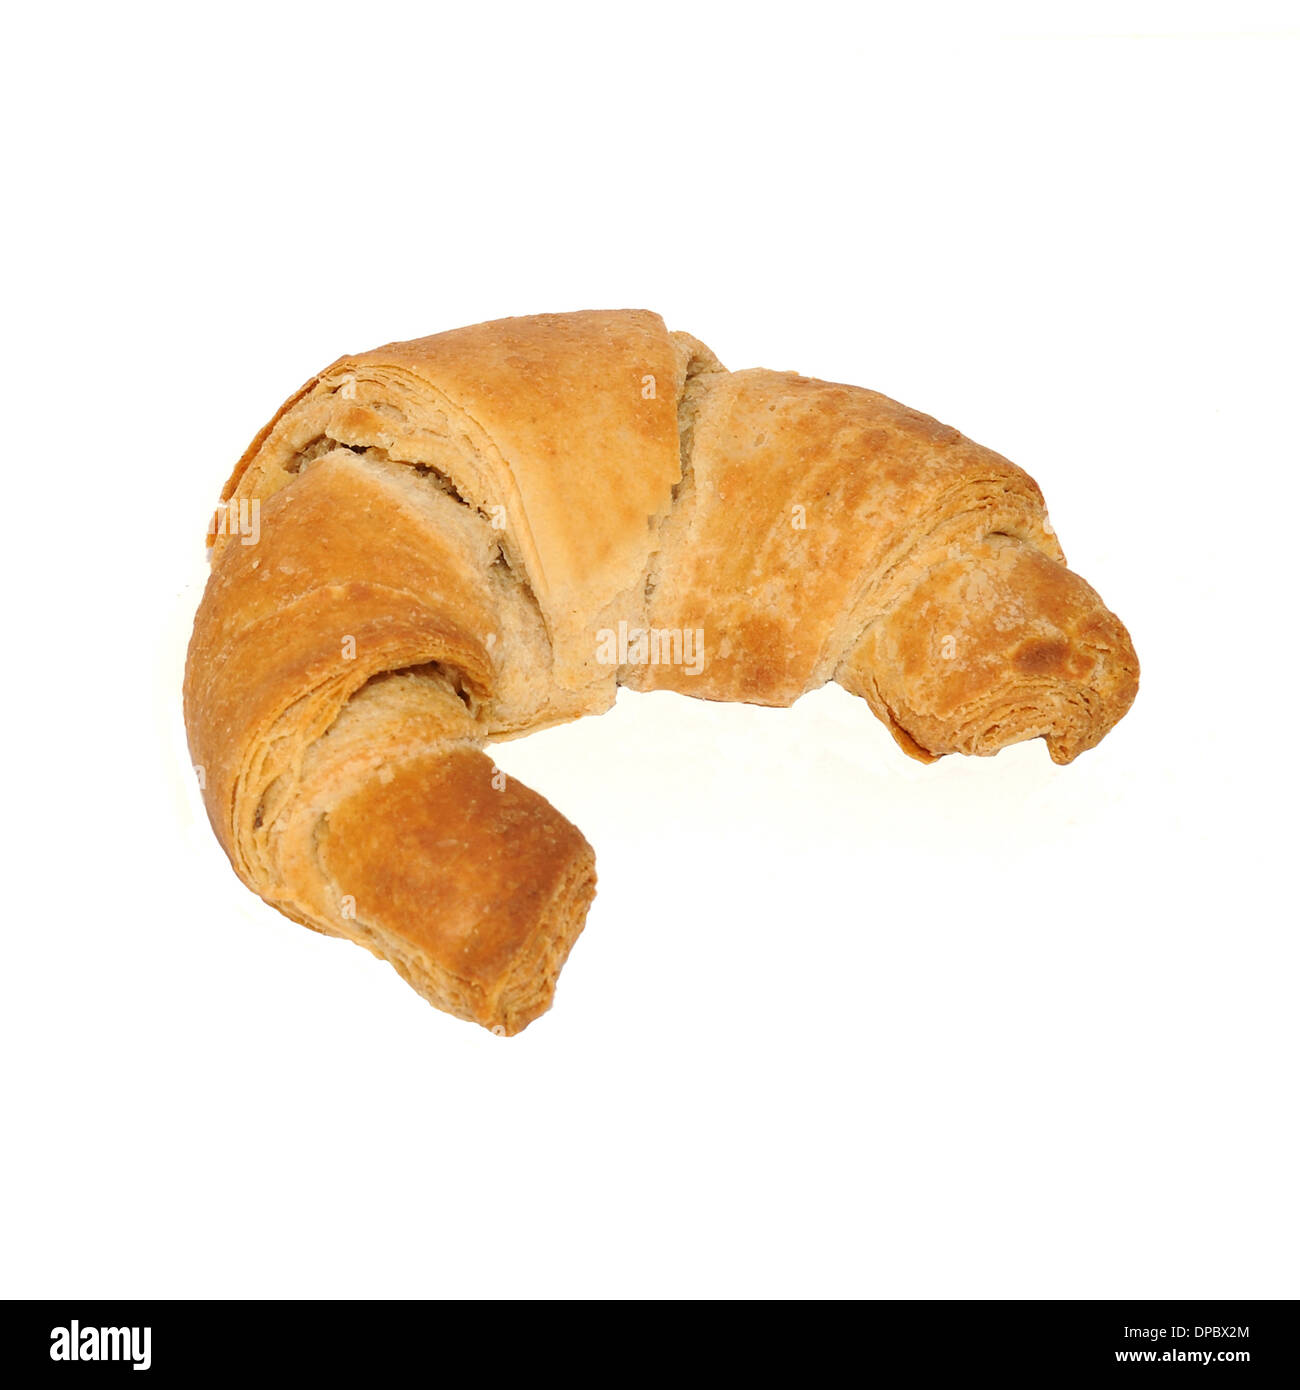 Croissant on a white background. Stock Photo